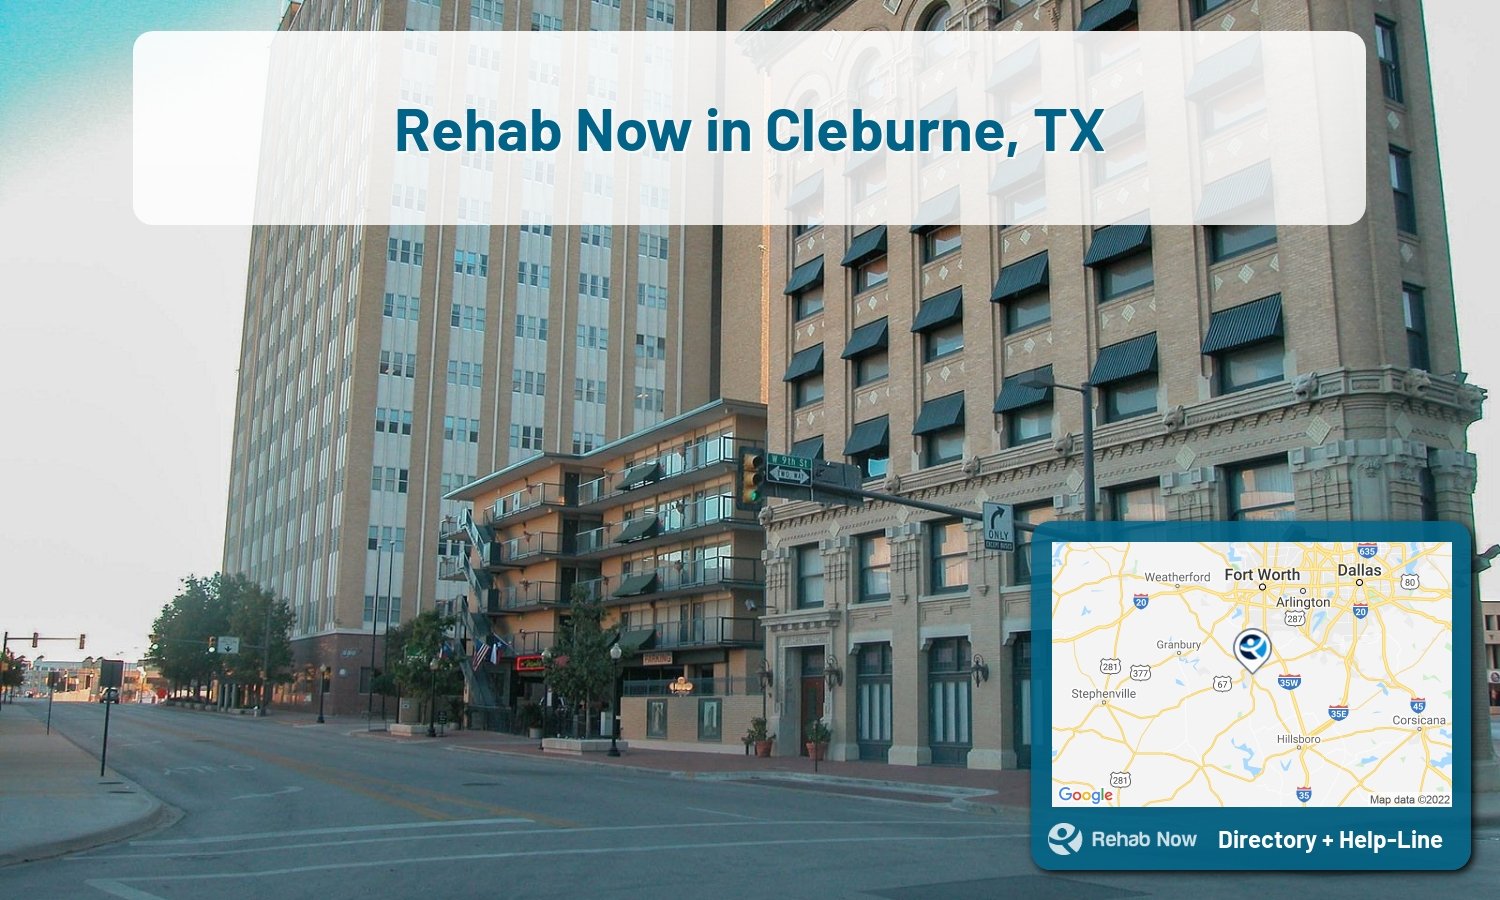 Cleburne, TX Treatment Centers. Find drug rehab in Cleburne, Texas, or detox and treatment programs. Get the right help now!